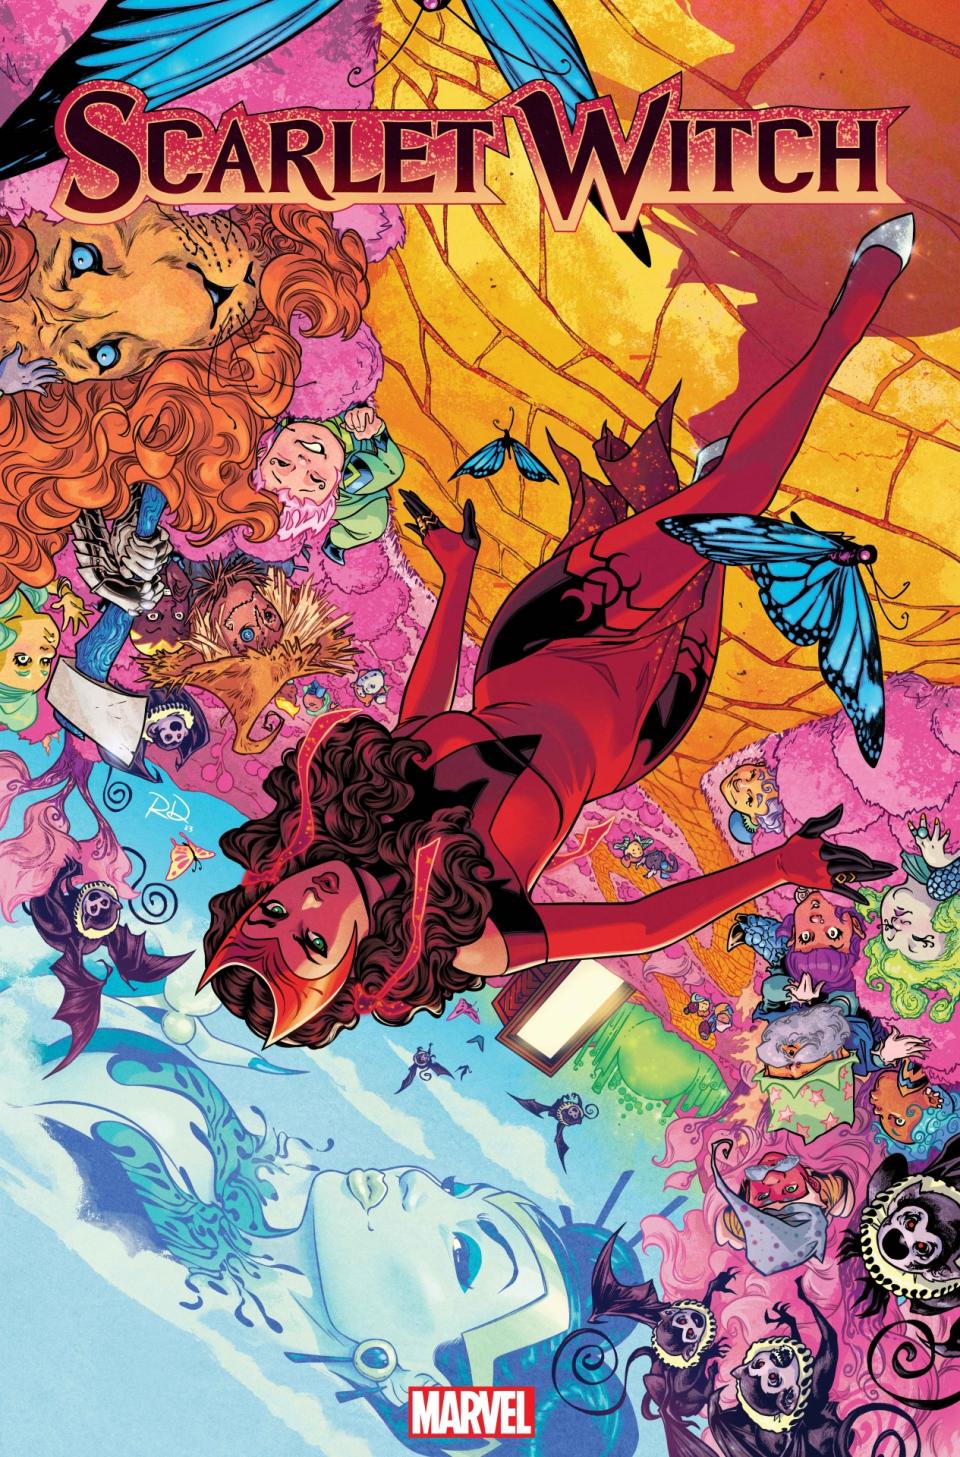 Scarlet Witch #7 cover art